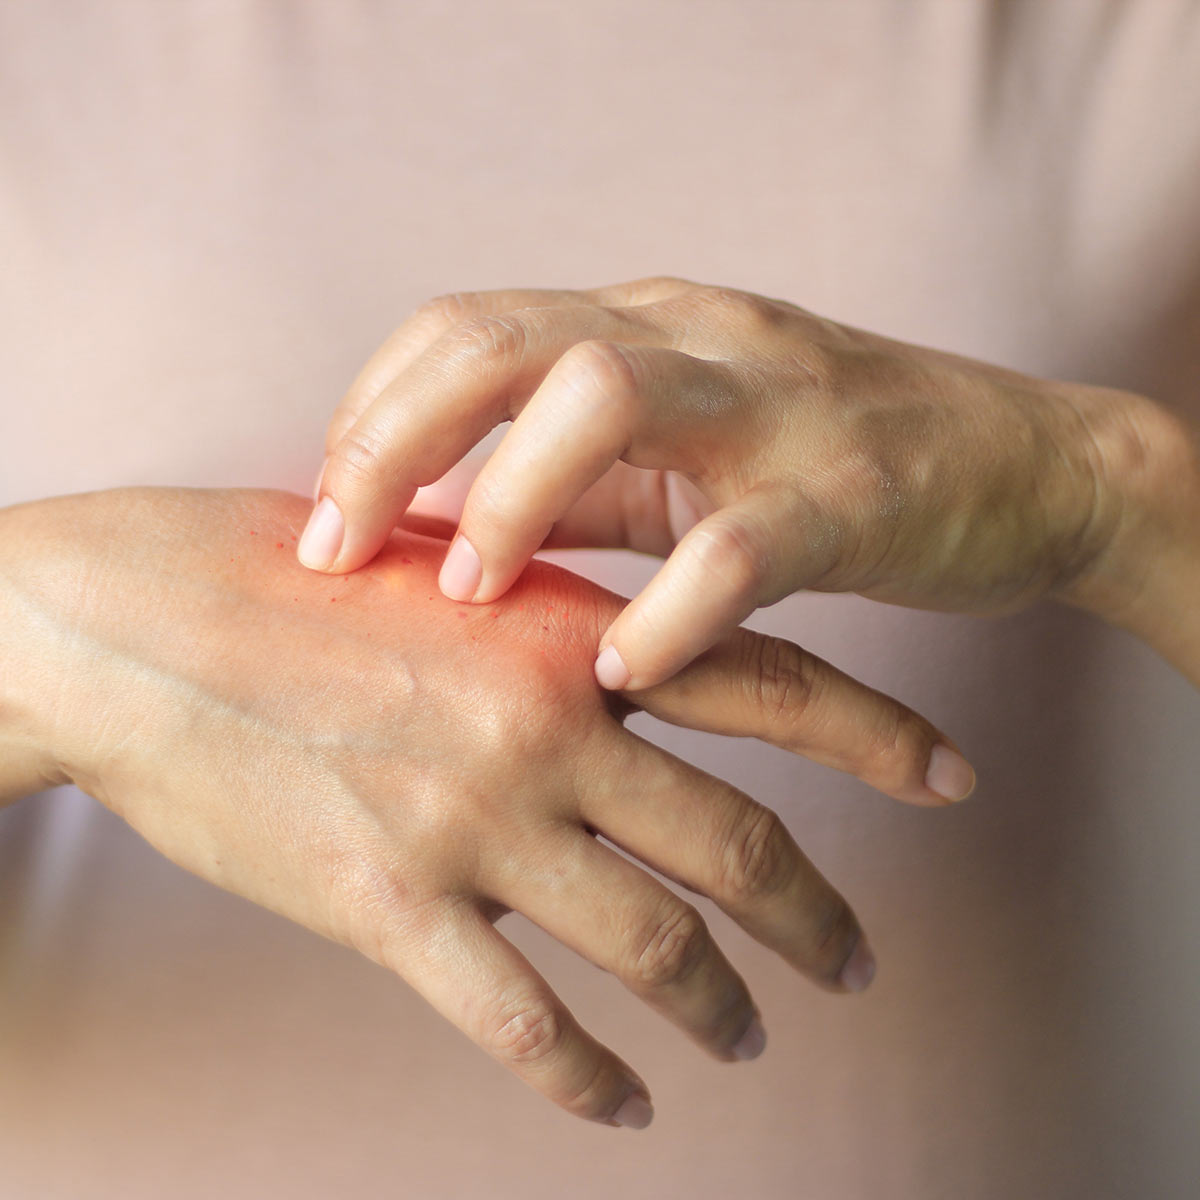 Closeup of a woman's hands, one scratching the other in apparent discomfort.